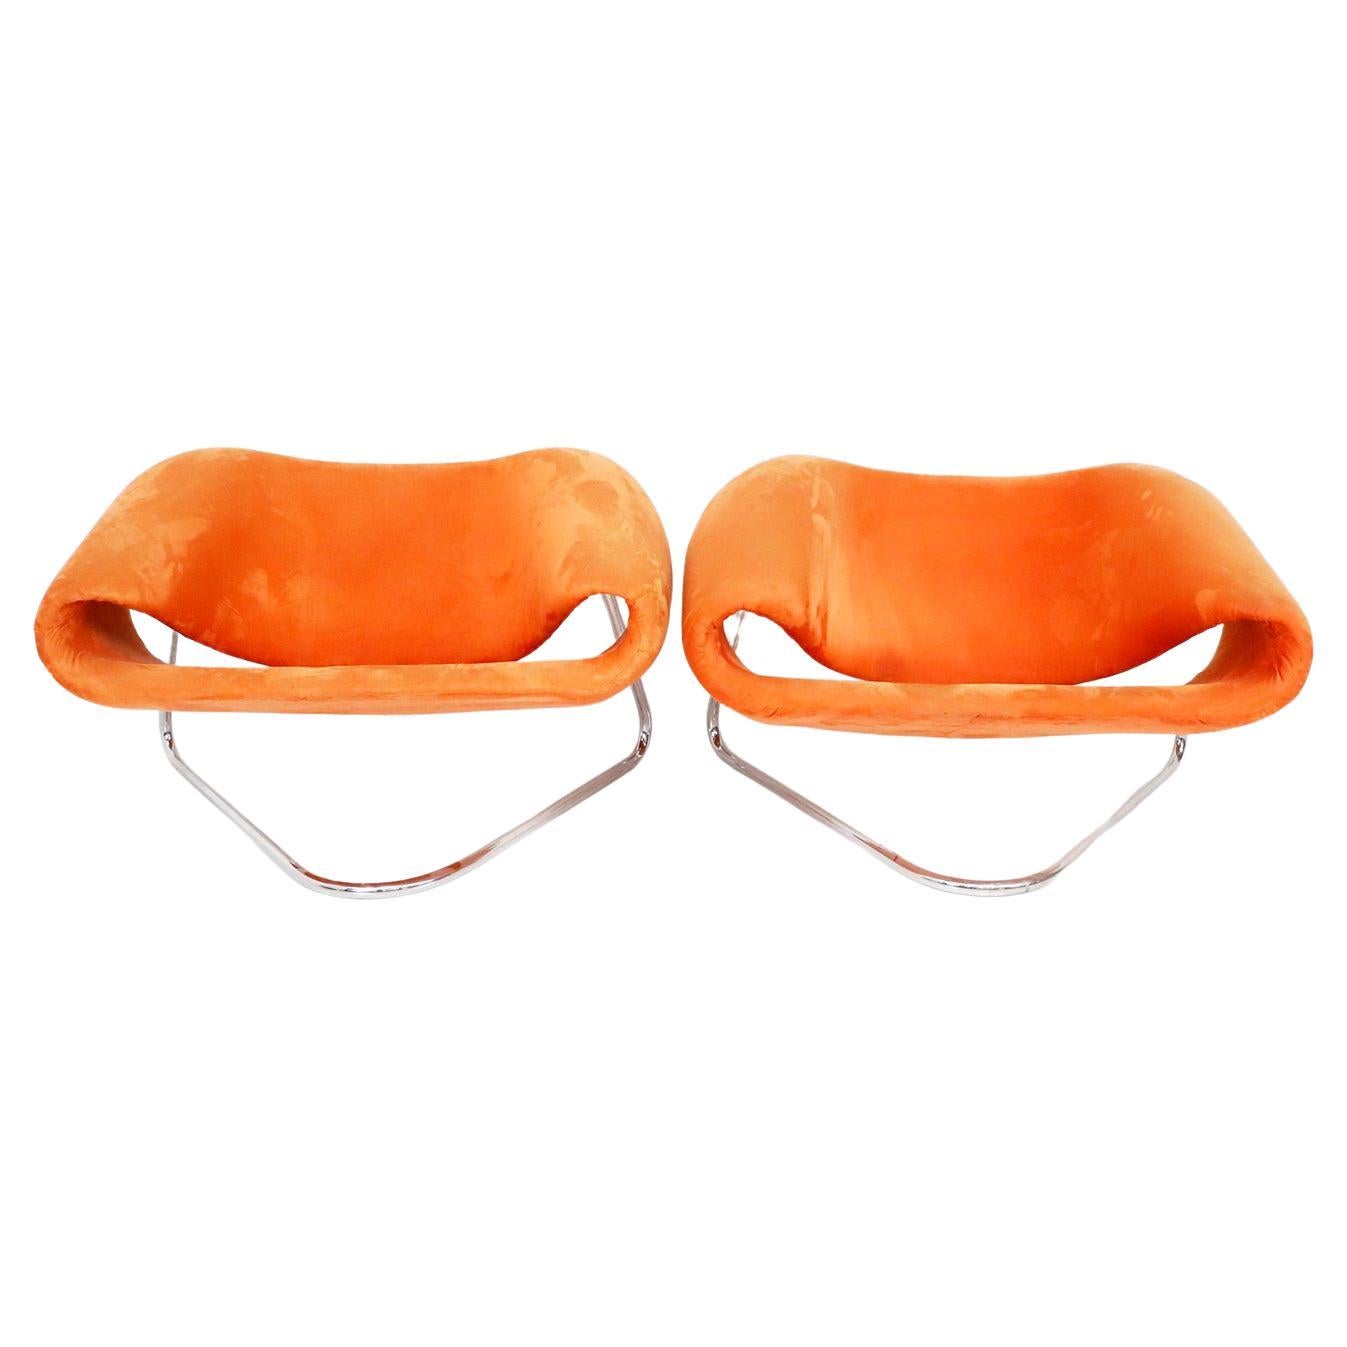 Pair of Ribbon Chairs Attributed to Cesare Leonardi & Franca Stagi For Sale